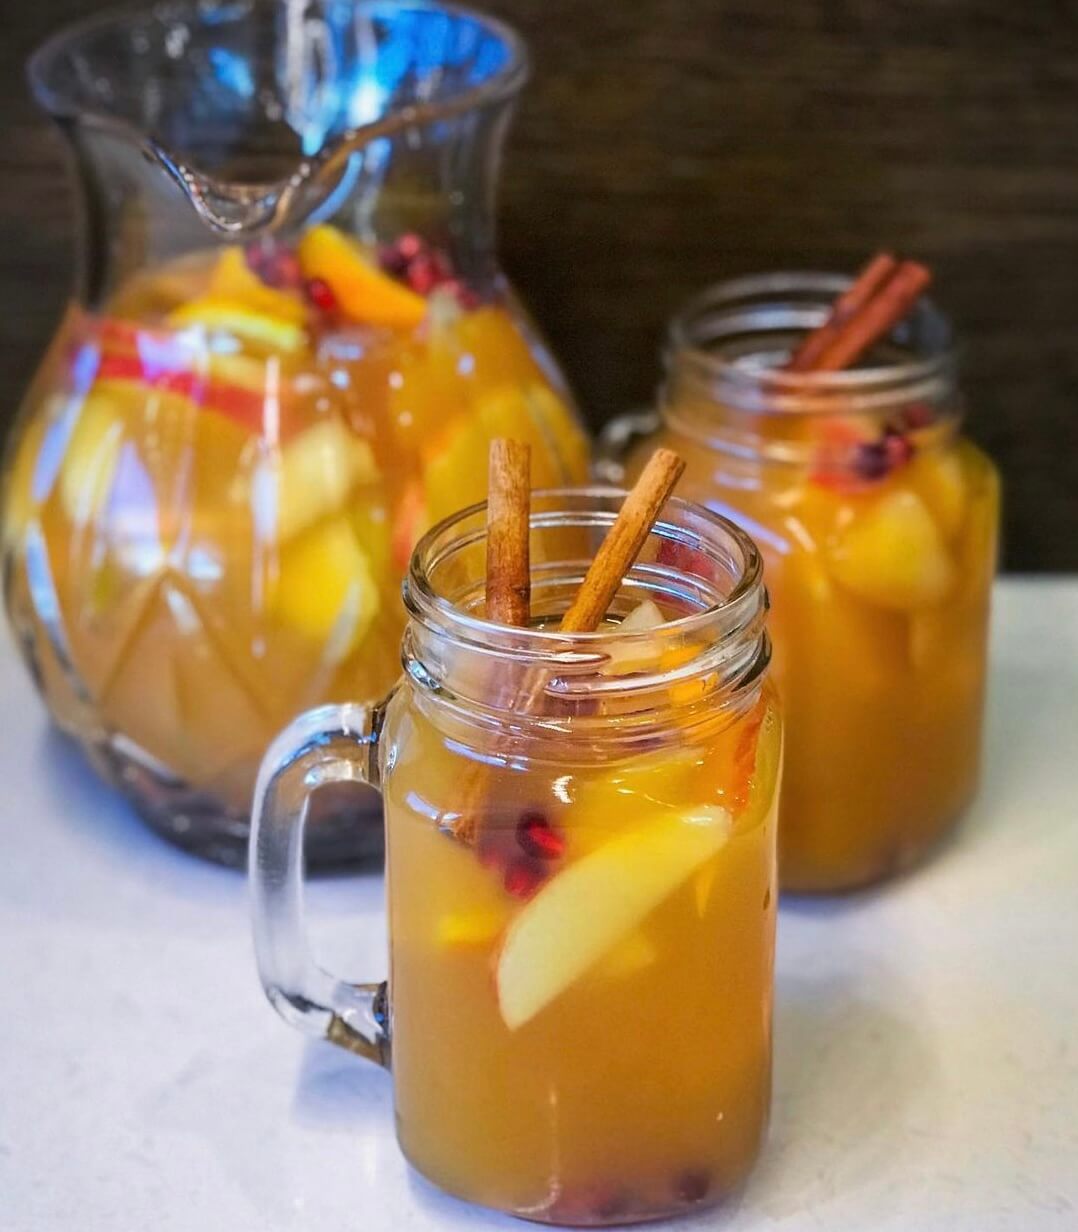 Image of Apple Cider Sangria Drinks and Pitcher